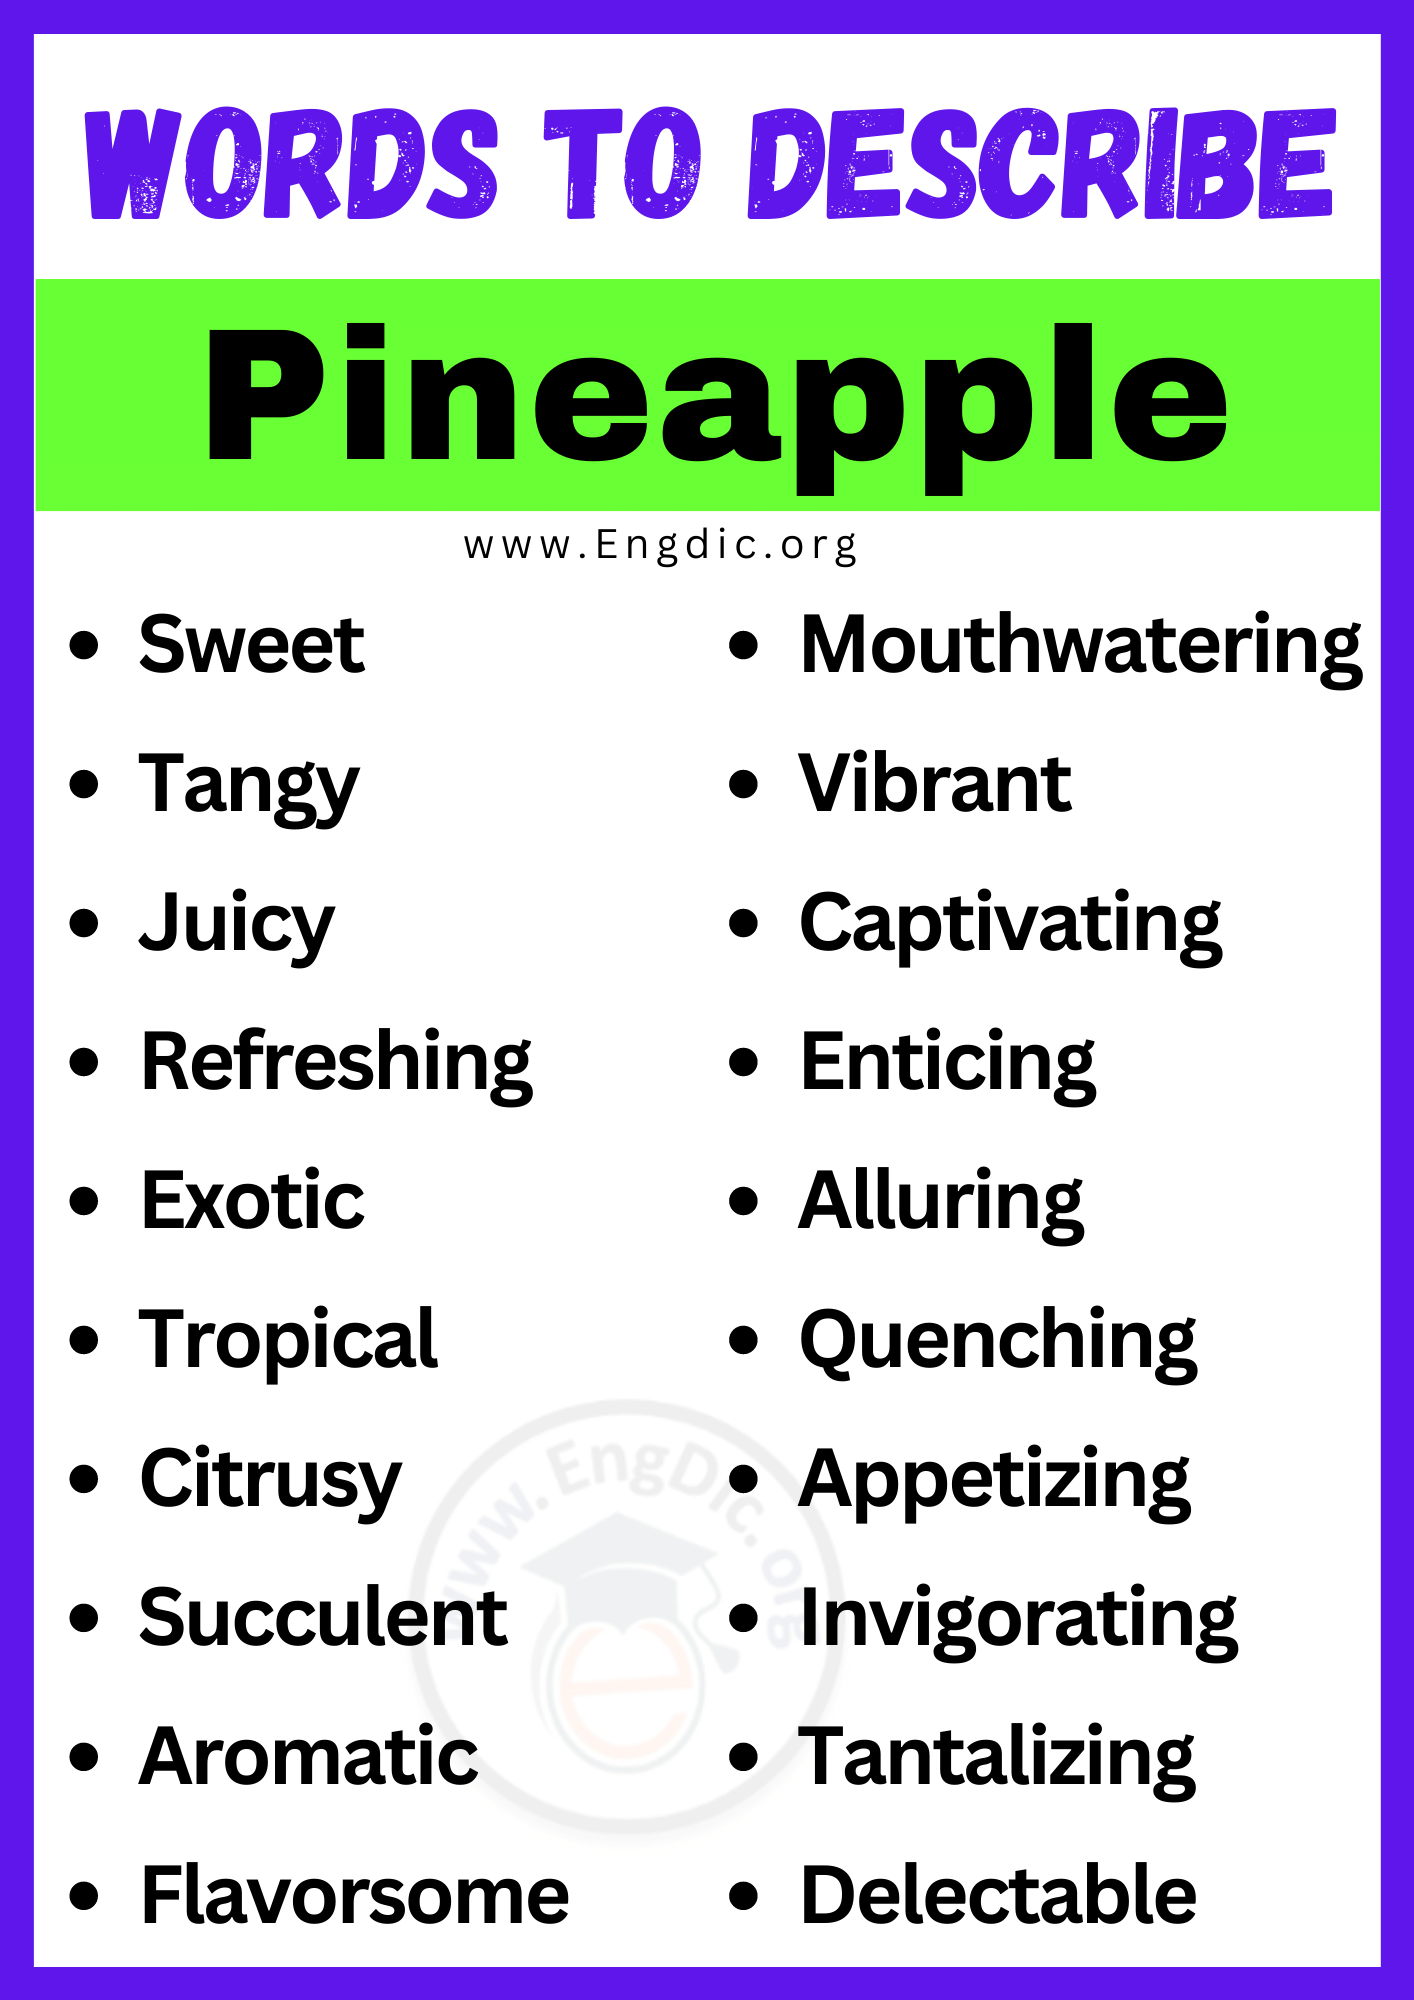 Words to Describe Pineapple